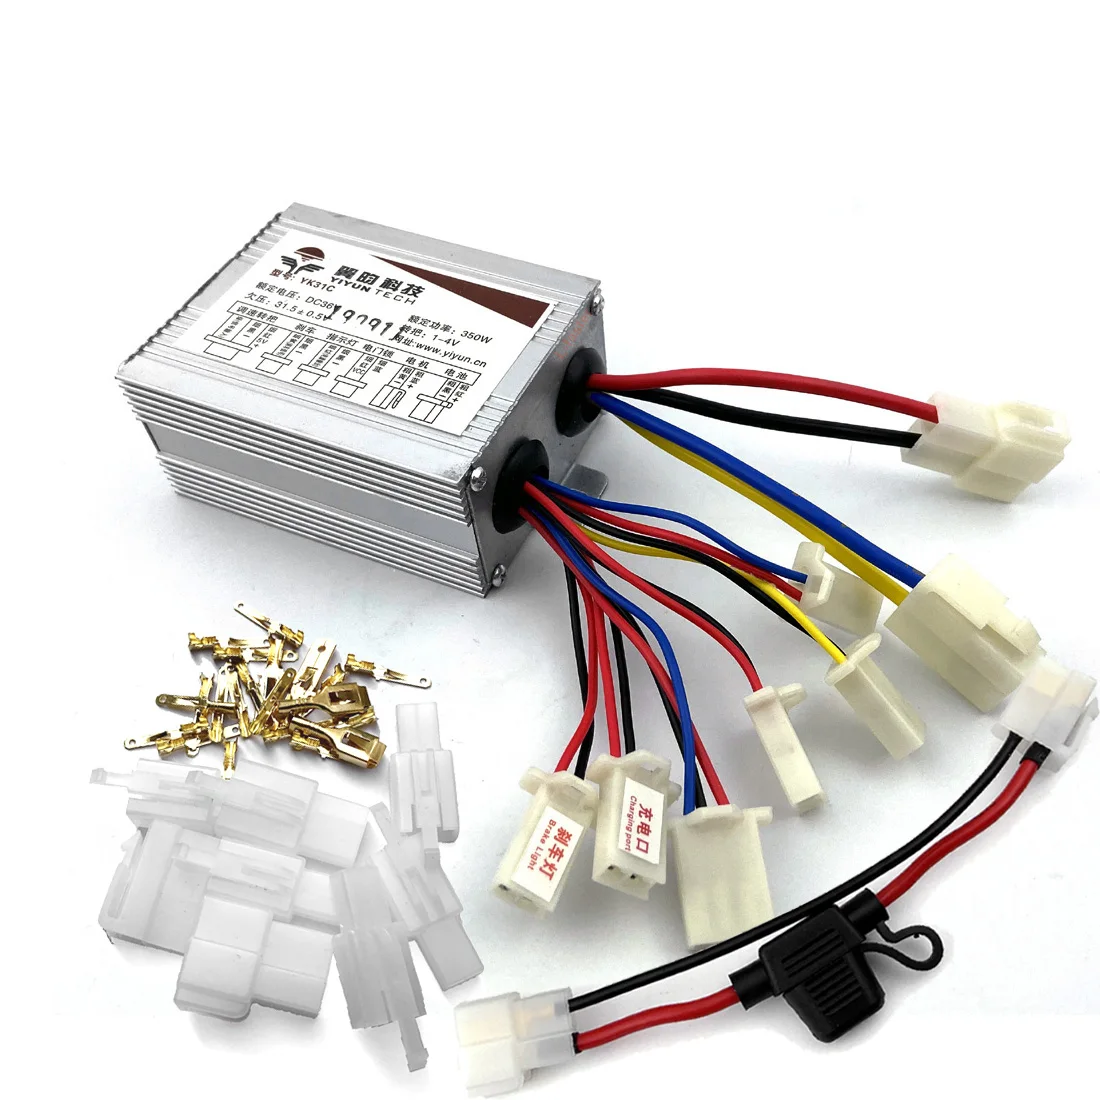 

24V 36V 350W Brushed Motor Control Unit WIth Fuse Mount And Connectors Plugs For Electric Bike Brush Motor